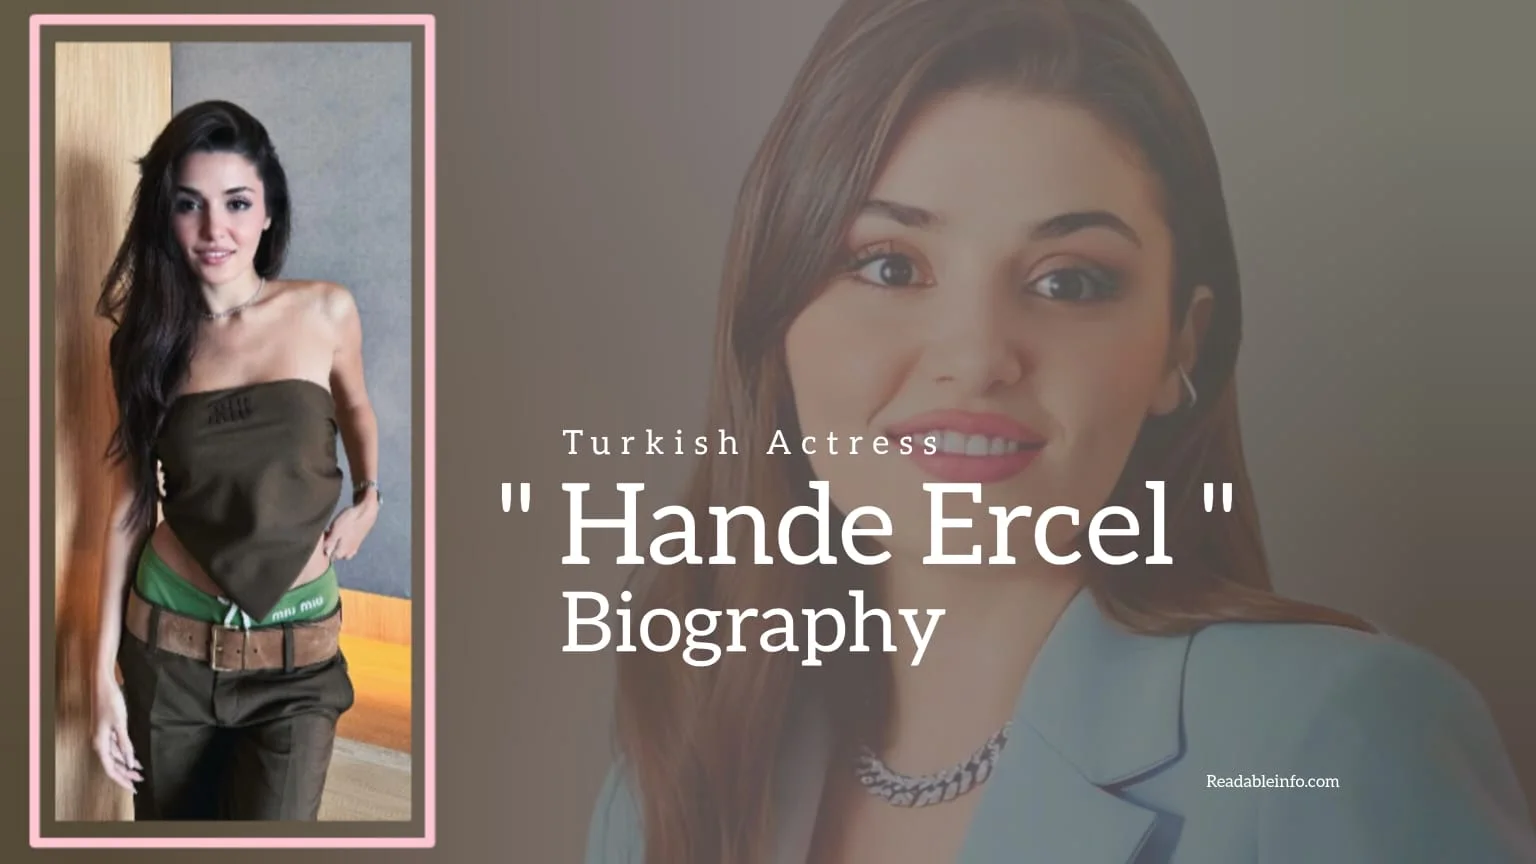 You are currently viewing Hande Ercel Biography (Turkish Actress) Age, Family, Boyfriend and More